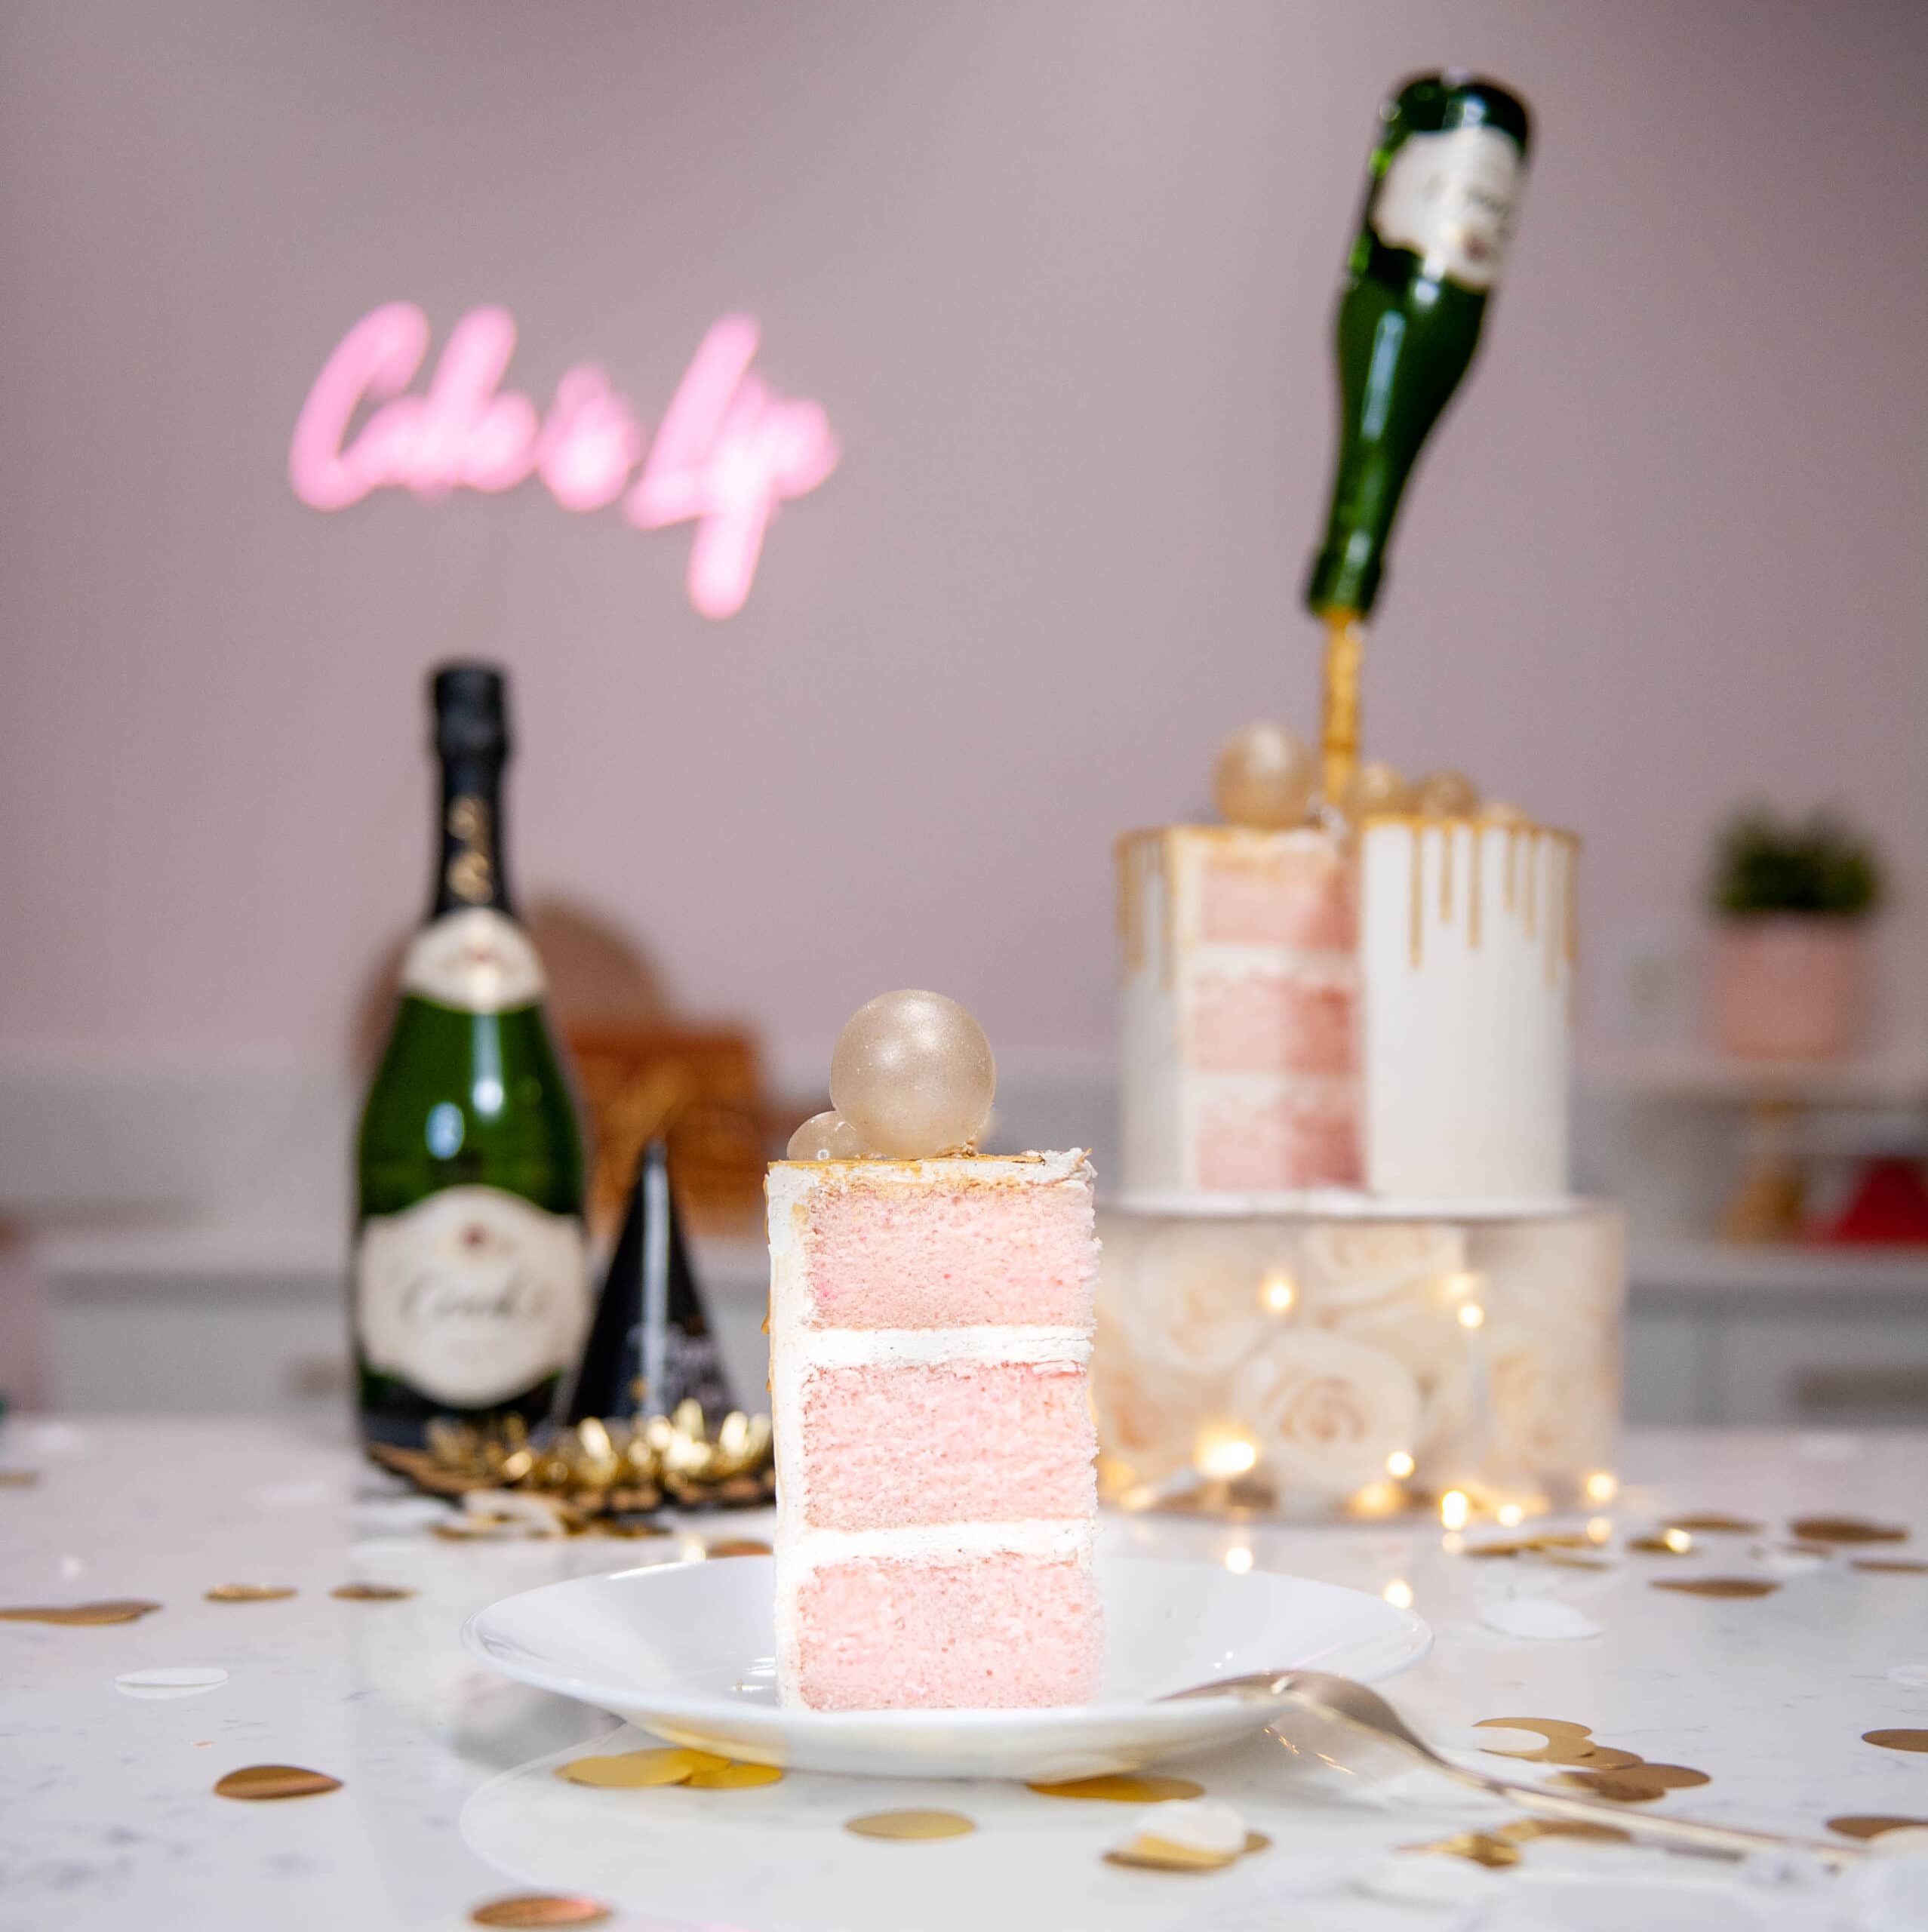 champagne cake on a plate with cake and champagne bottle in the background